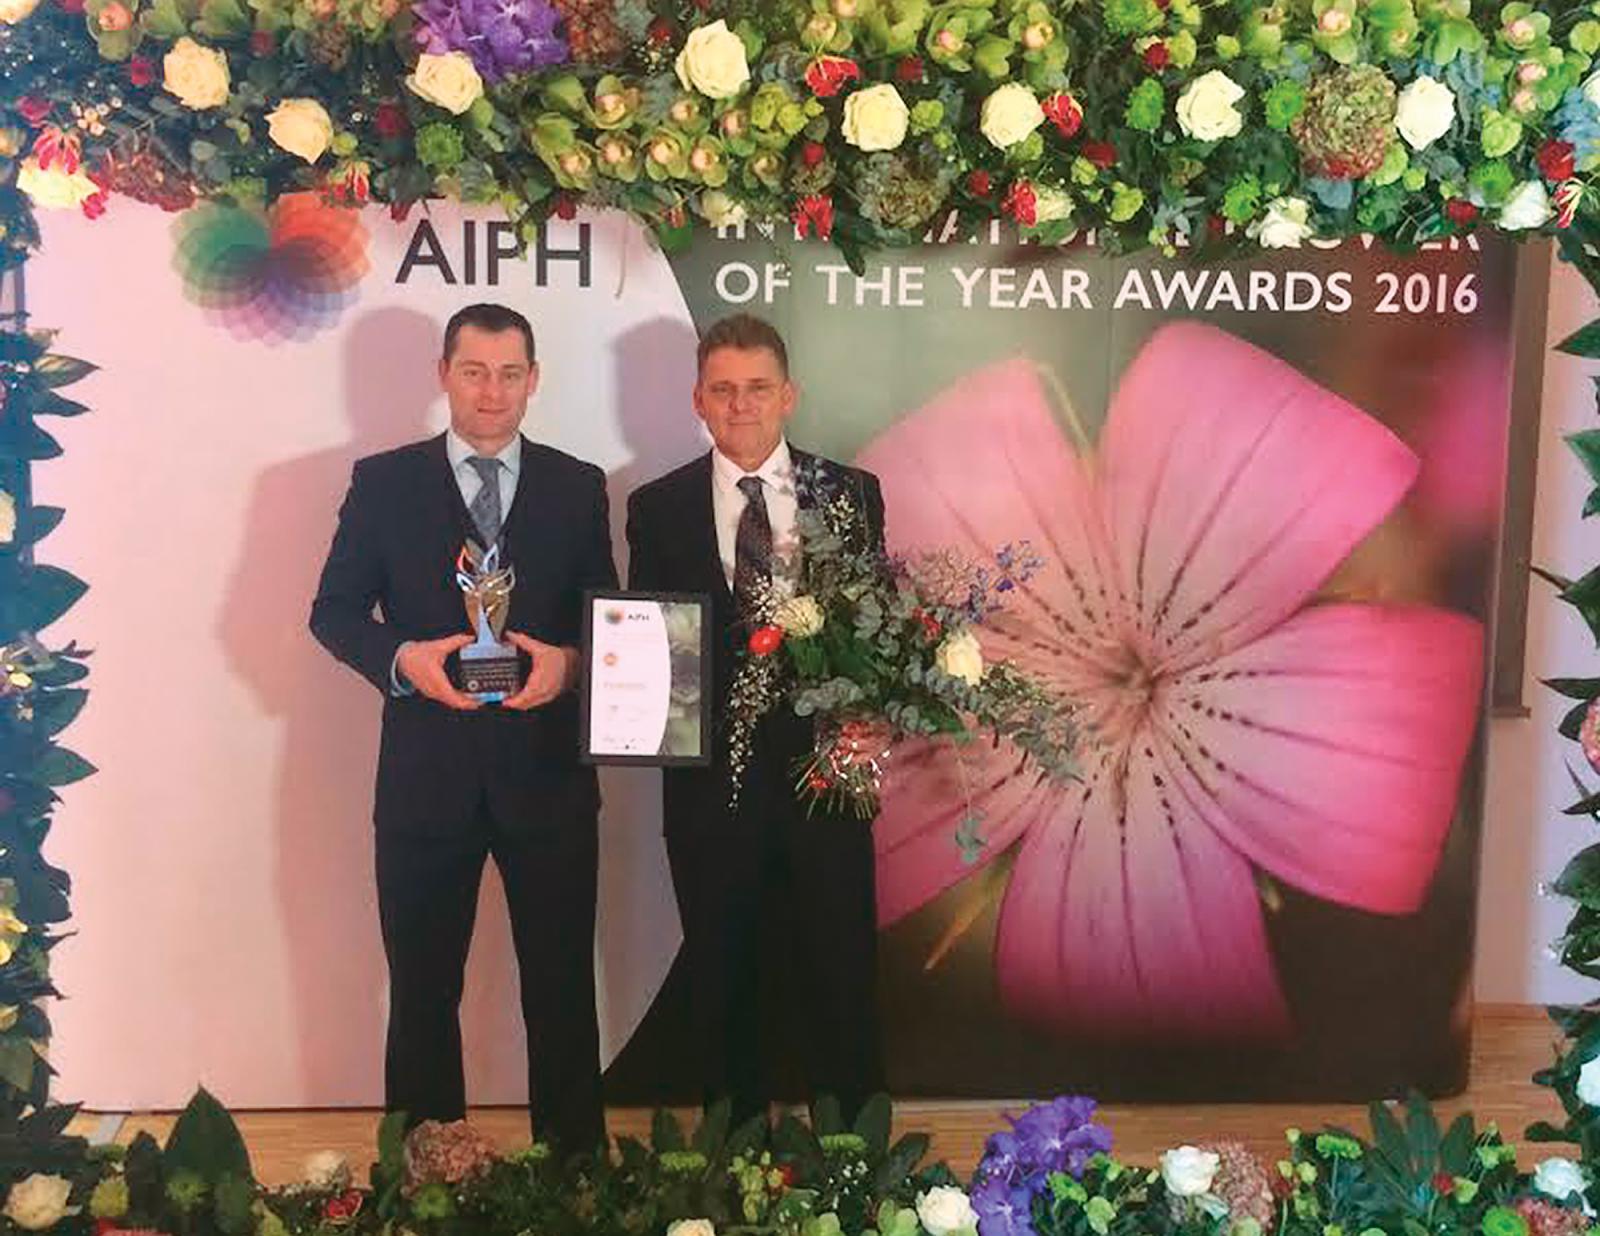 Matthew (left) and Maklin Tillaart (right) of Dutchmaster Nurseries won bronze at the  AIPH Grower of the Year Awards in Essen, Germany.